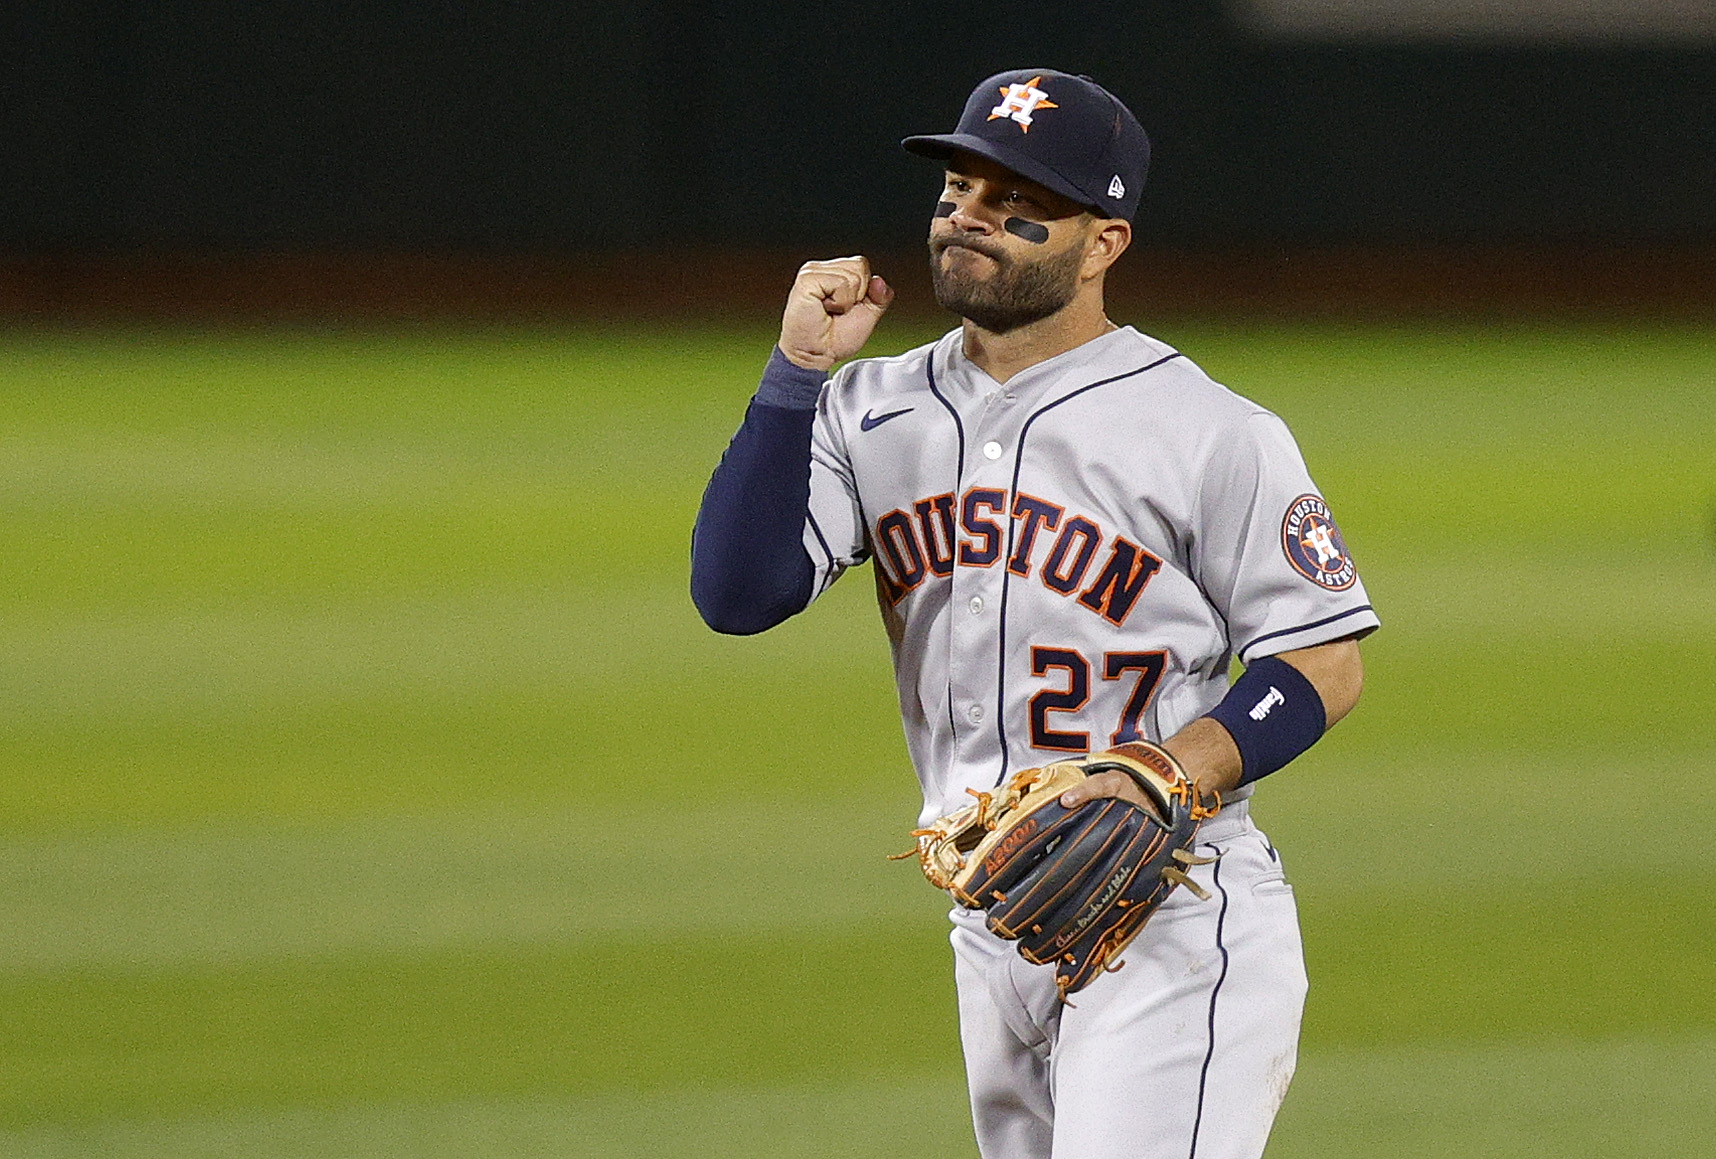 Altuve likely to return to Astros lineup early this week